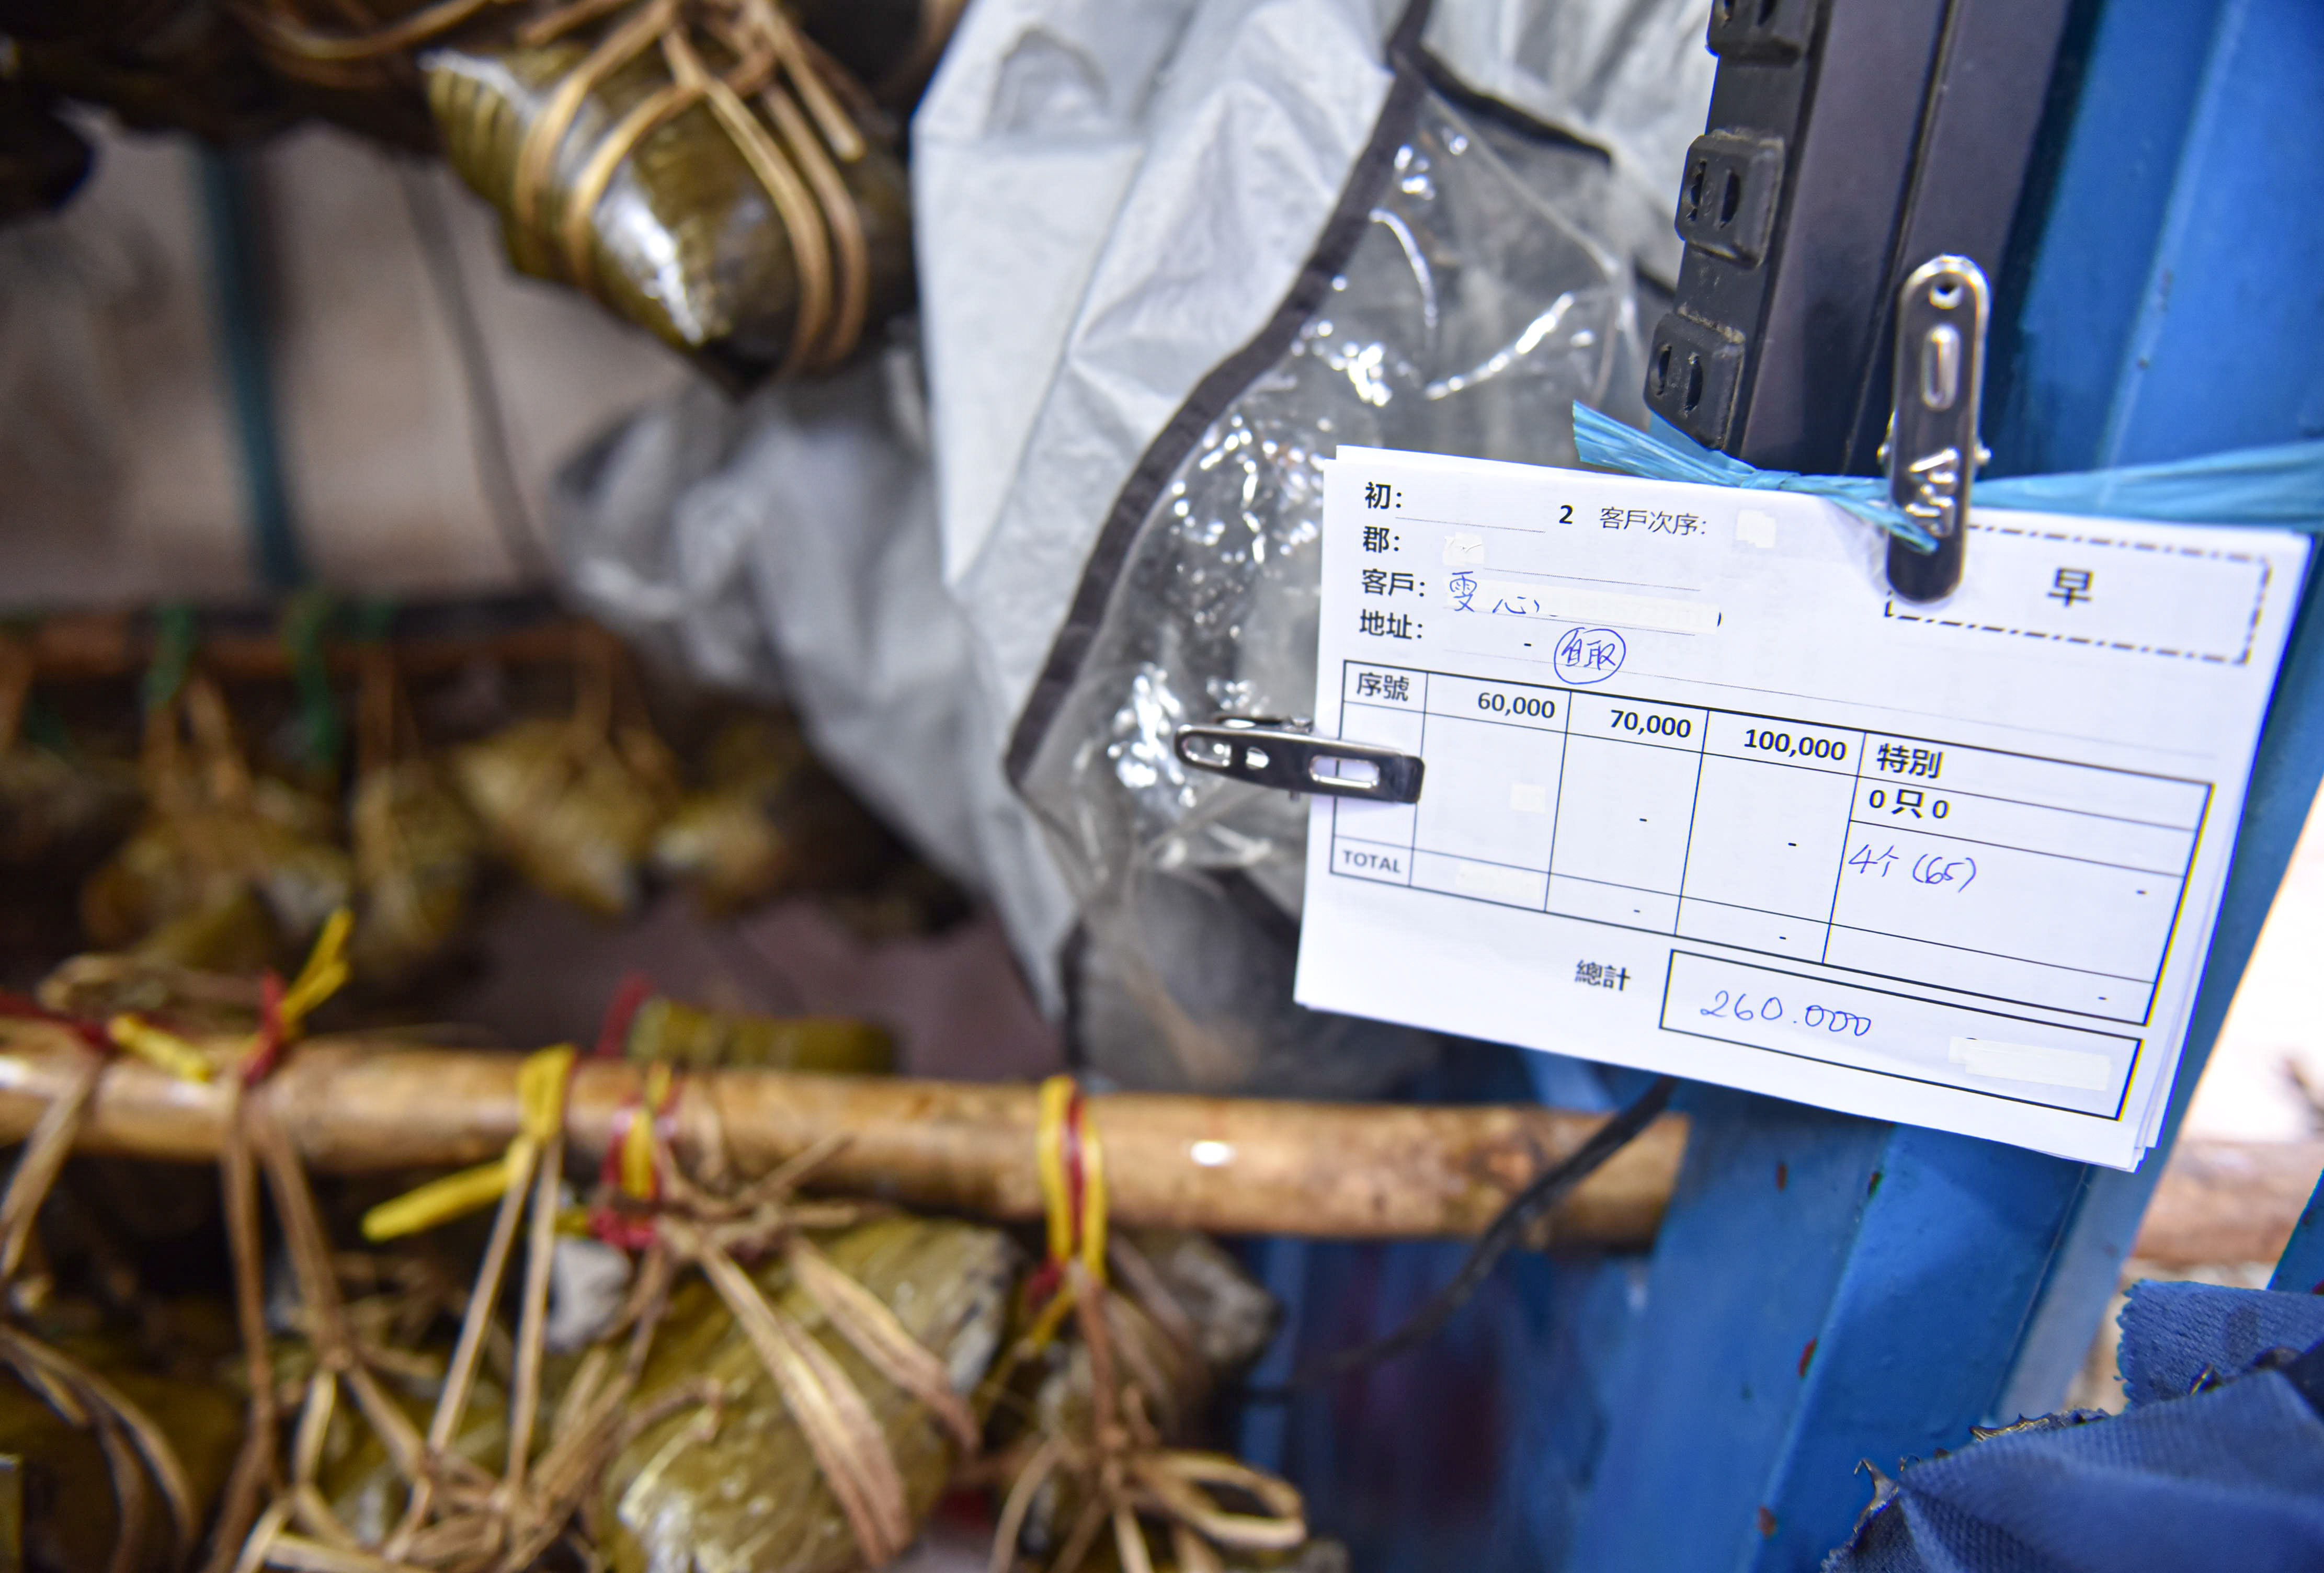 A notepad shows customers’ zongzi orders at An Ky Banh Chung in District 11, Ho Chi Minh City. Photo: Ngoc Phuong / Tuoi Tre